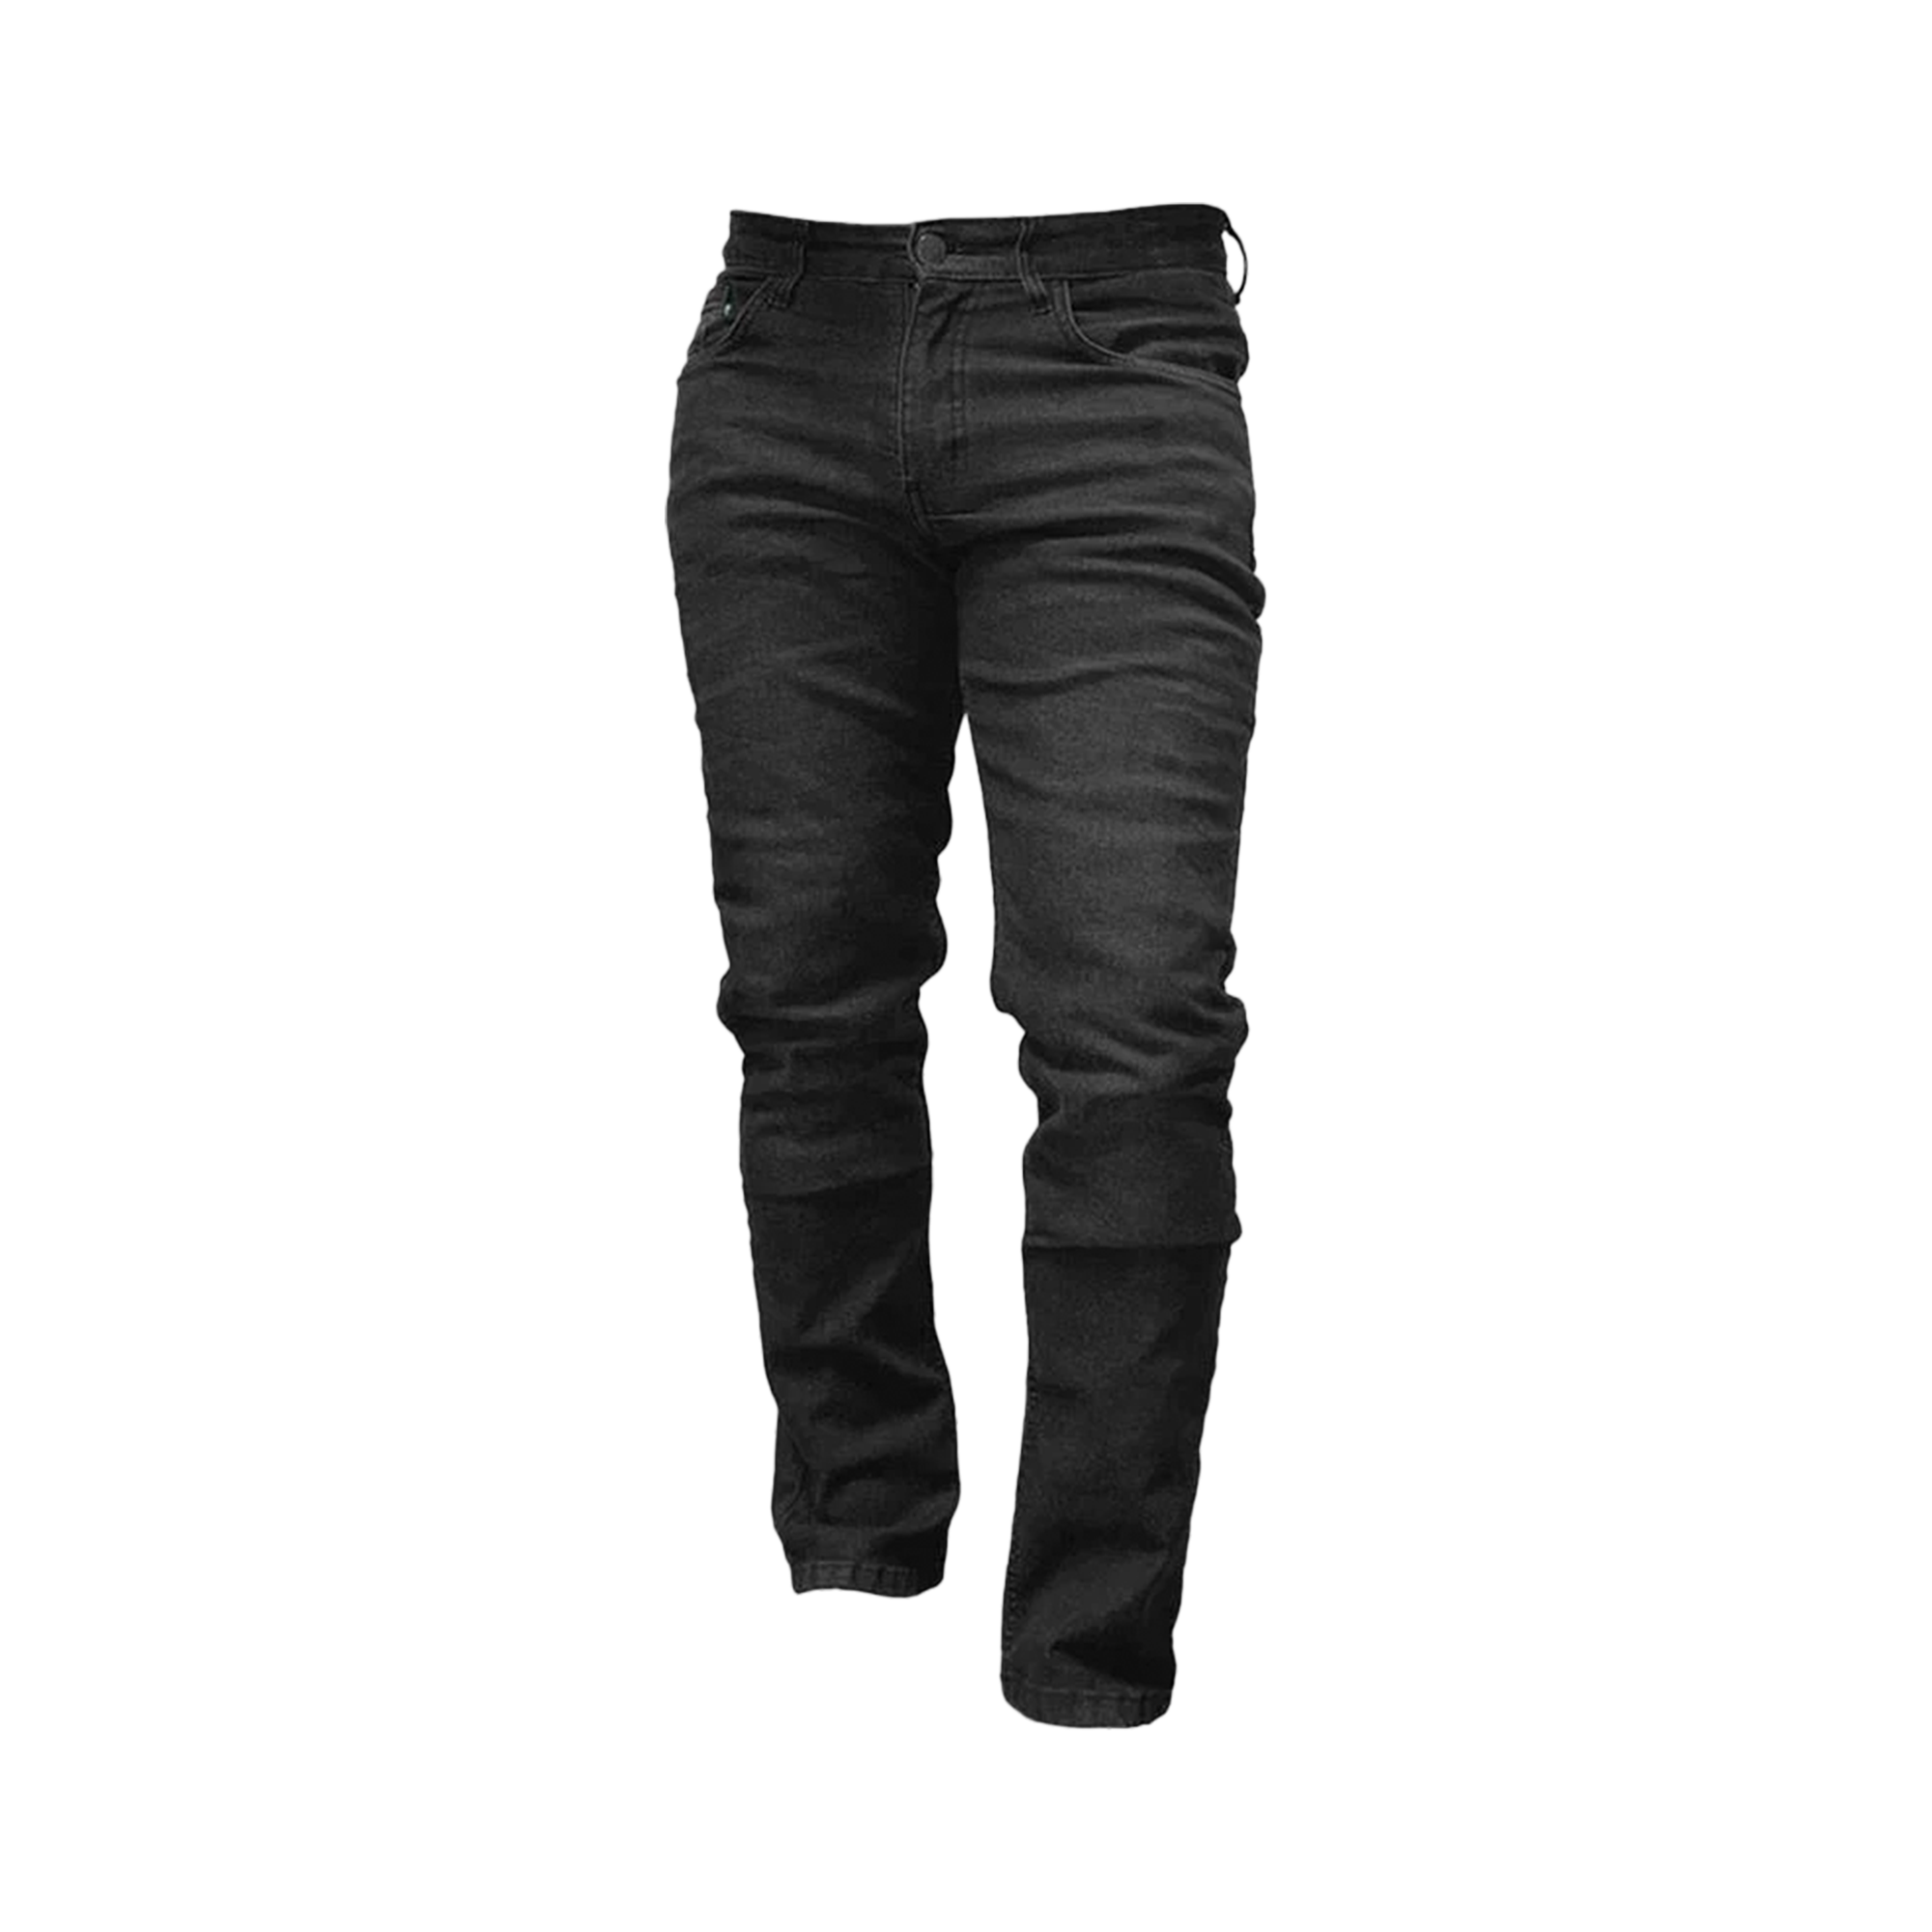 Lazyrolling Armored Jeans